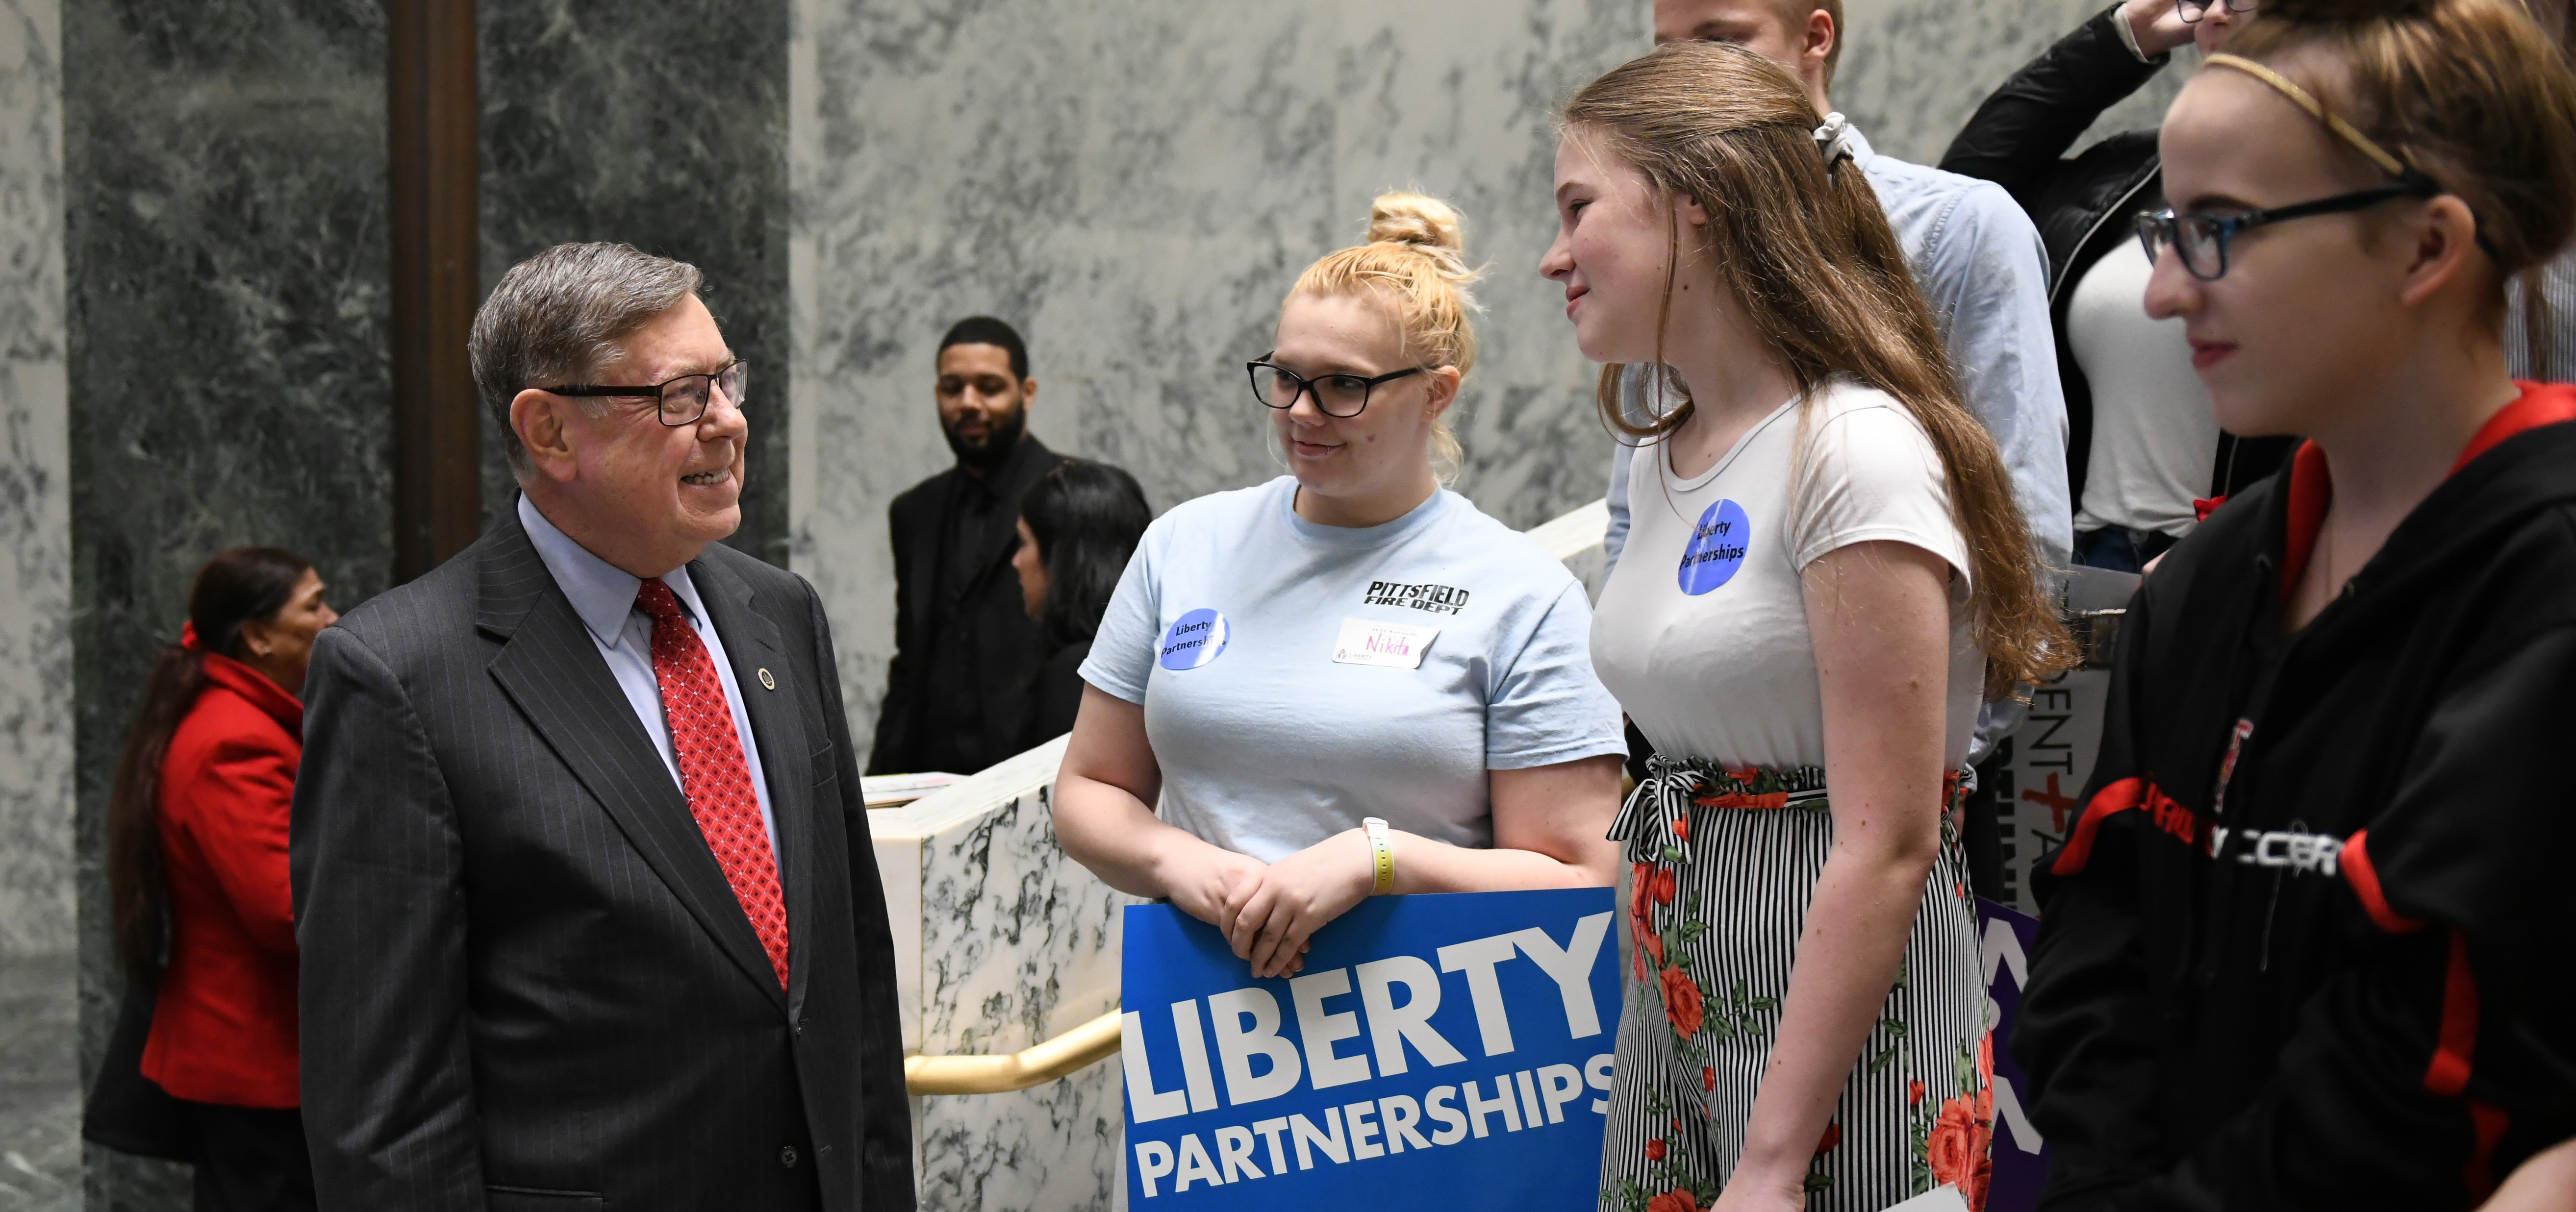 Seward welcomes students from Liberty Partnerships Program to capitol